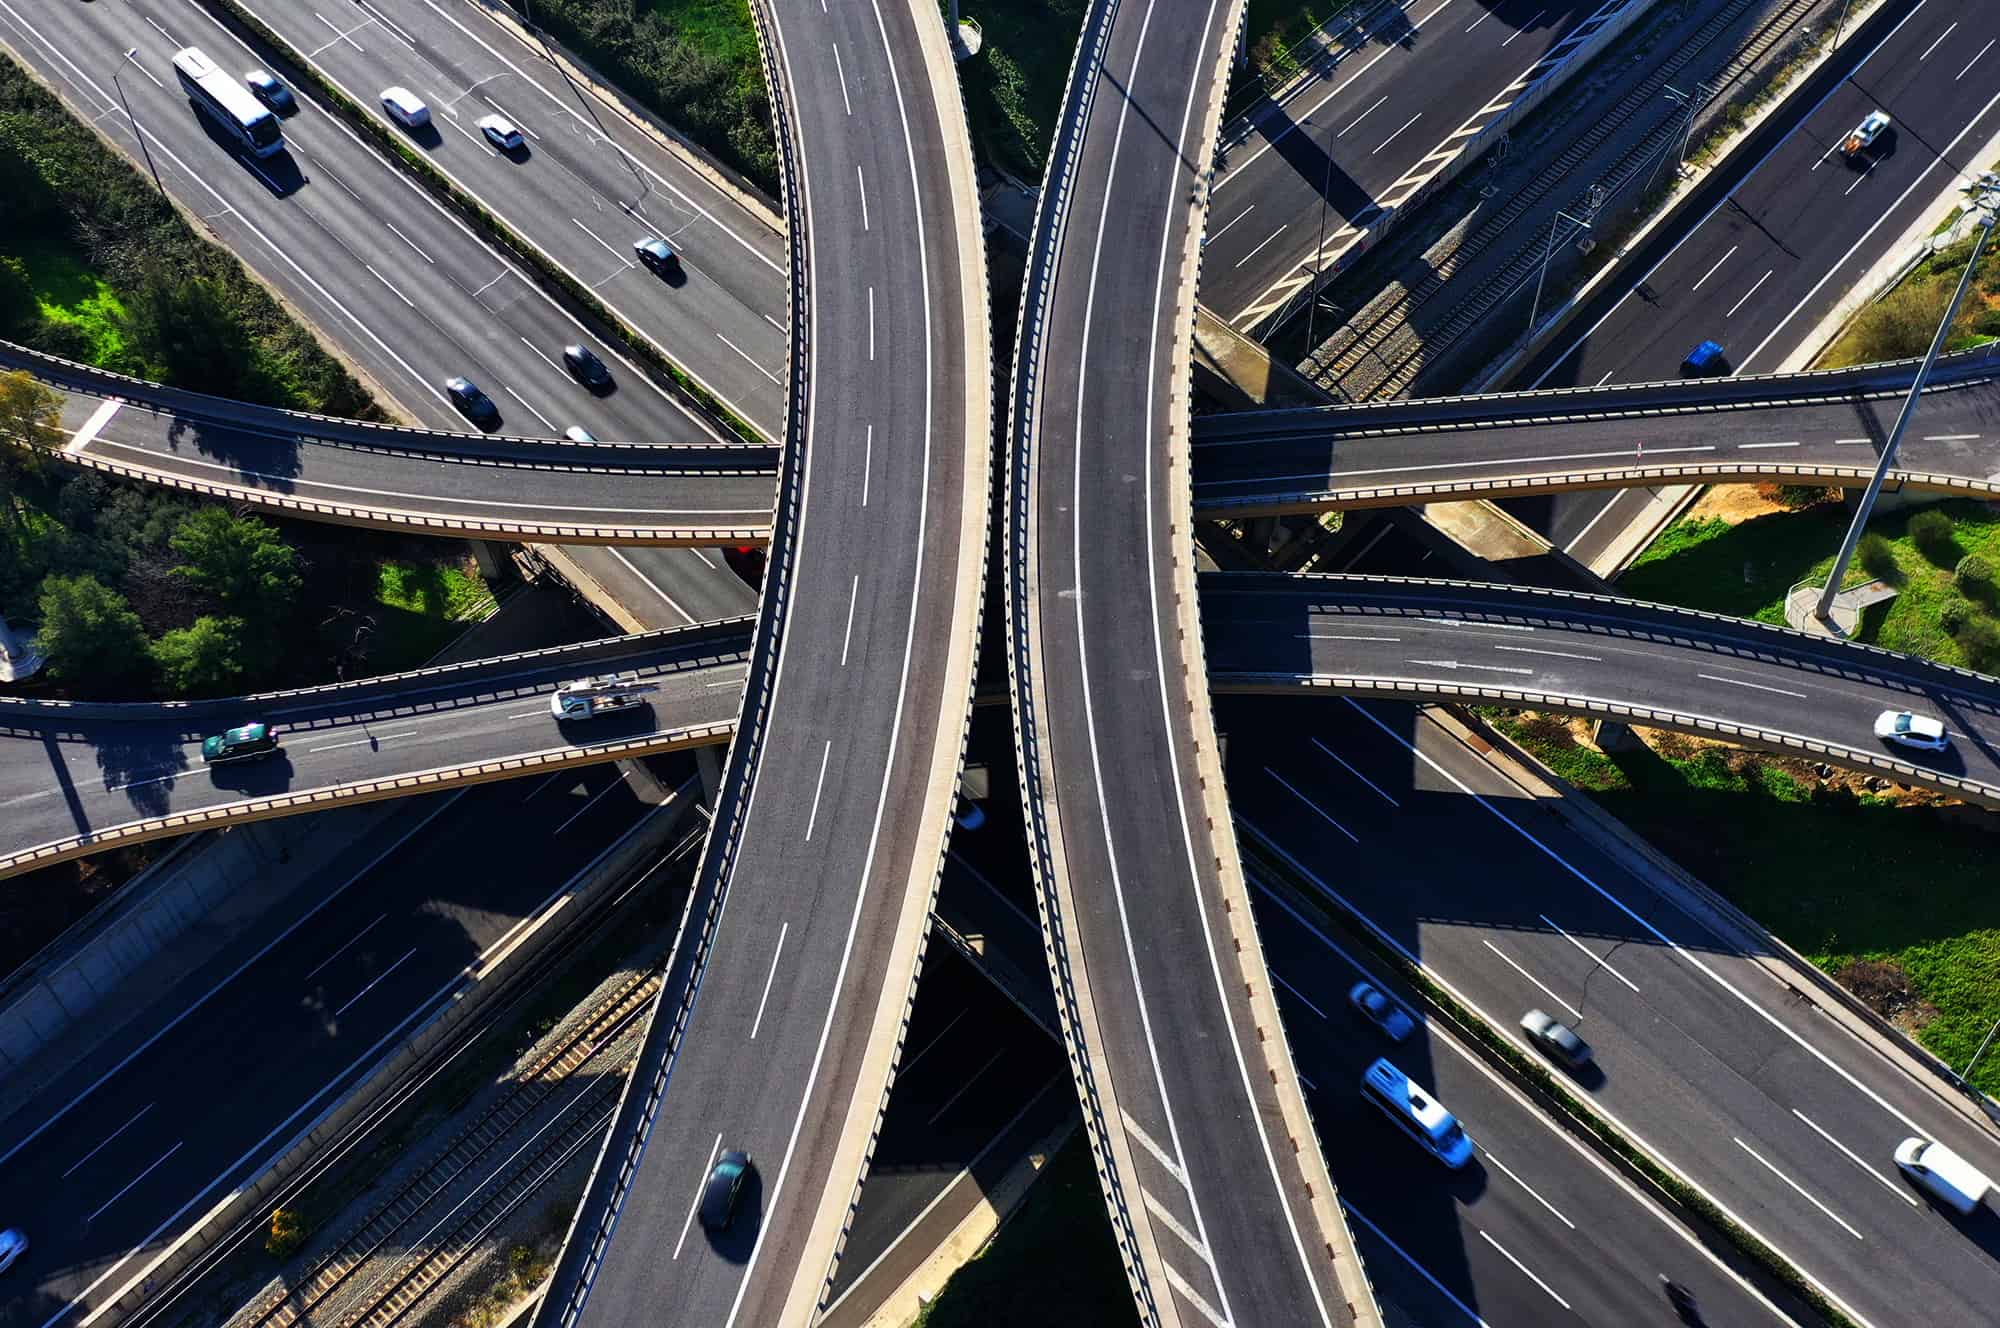 Aerial view of a multi-level highway interchange with cars and trucks.